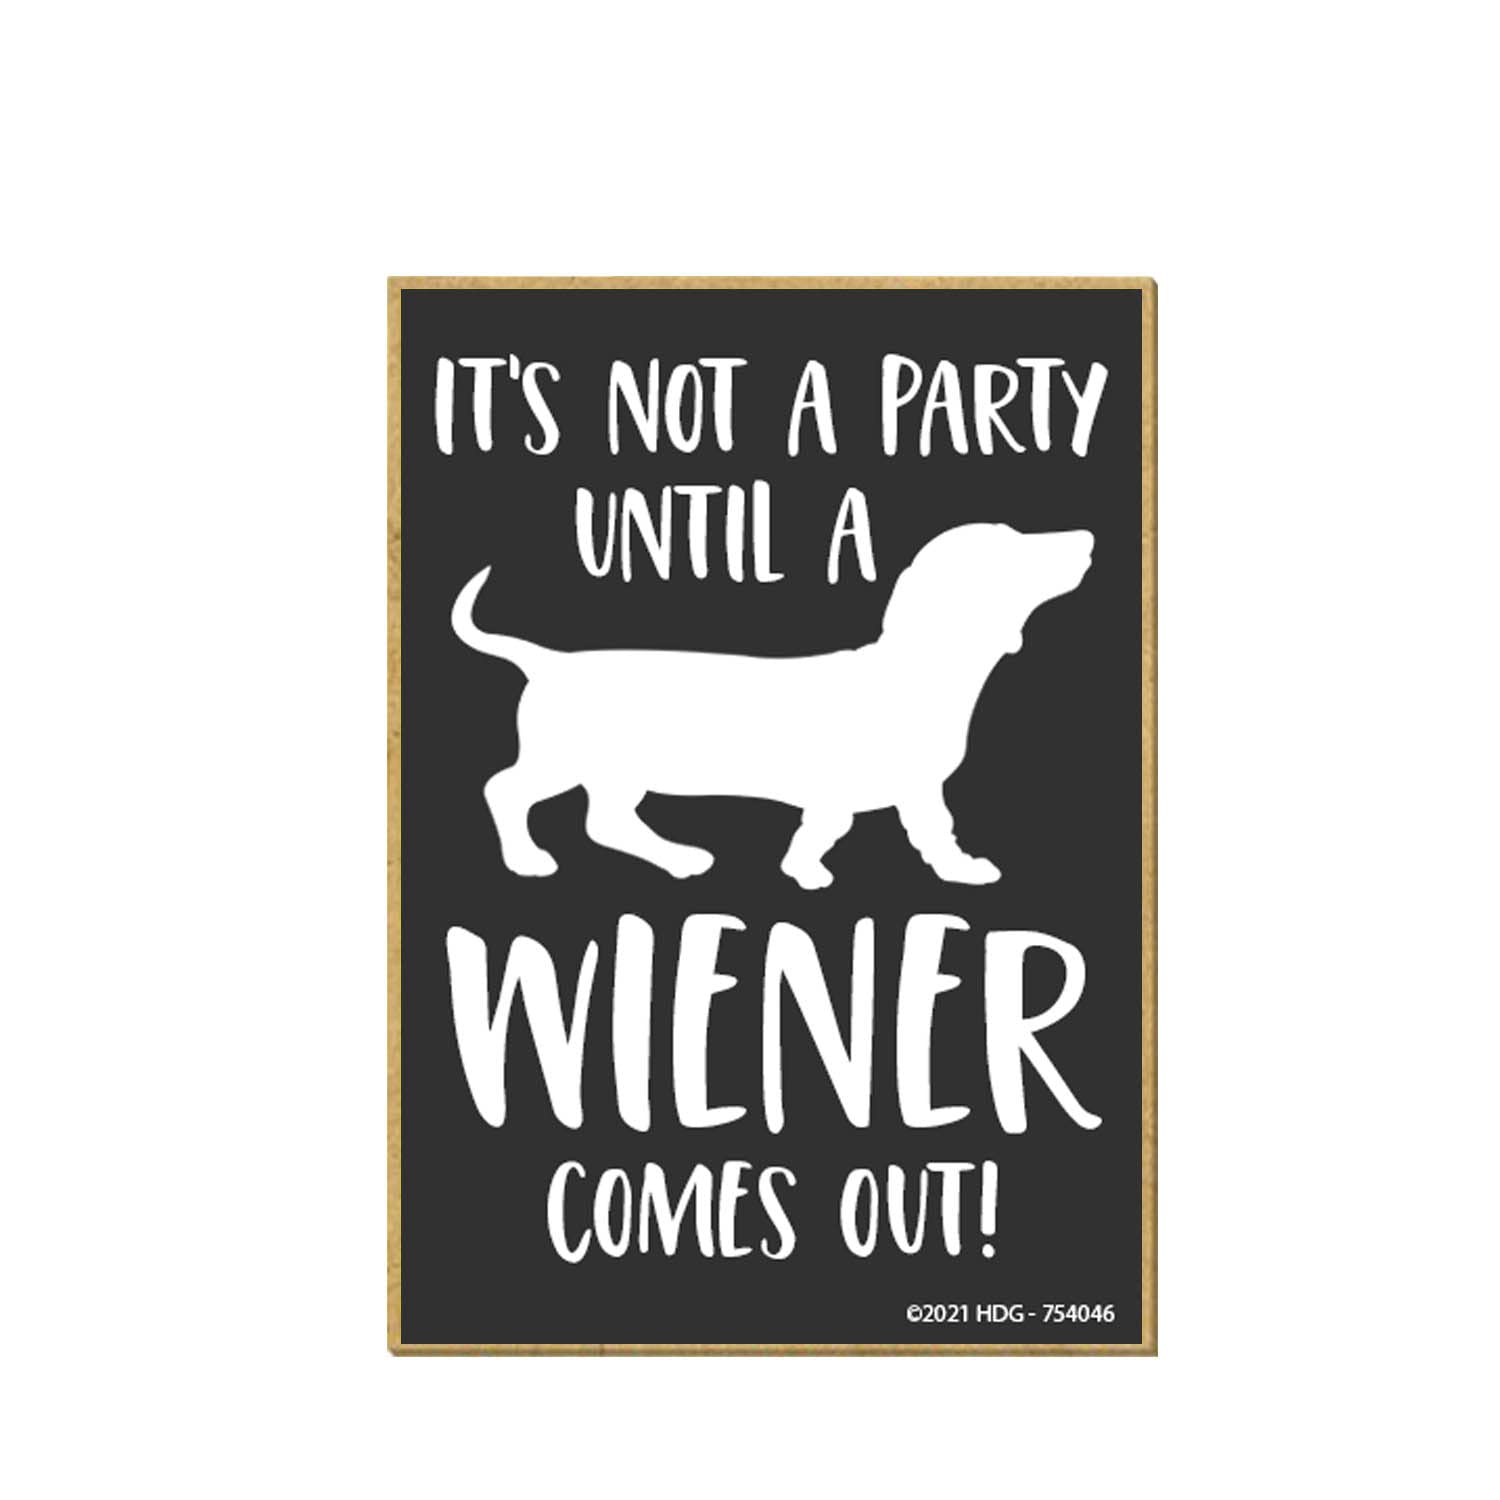 Honey Dew Gifts, It's Not a Party Until a Wiener Comes Out, 2.5 inch by 3.5 inch, Made In USA, Funny Fridge, Locker Decorations, Refrigerator Magnet, Decorative Funny Magnets, Dachshund Decor, Dog Mom